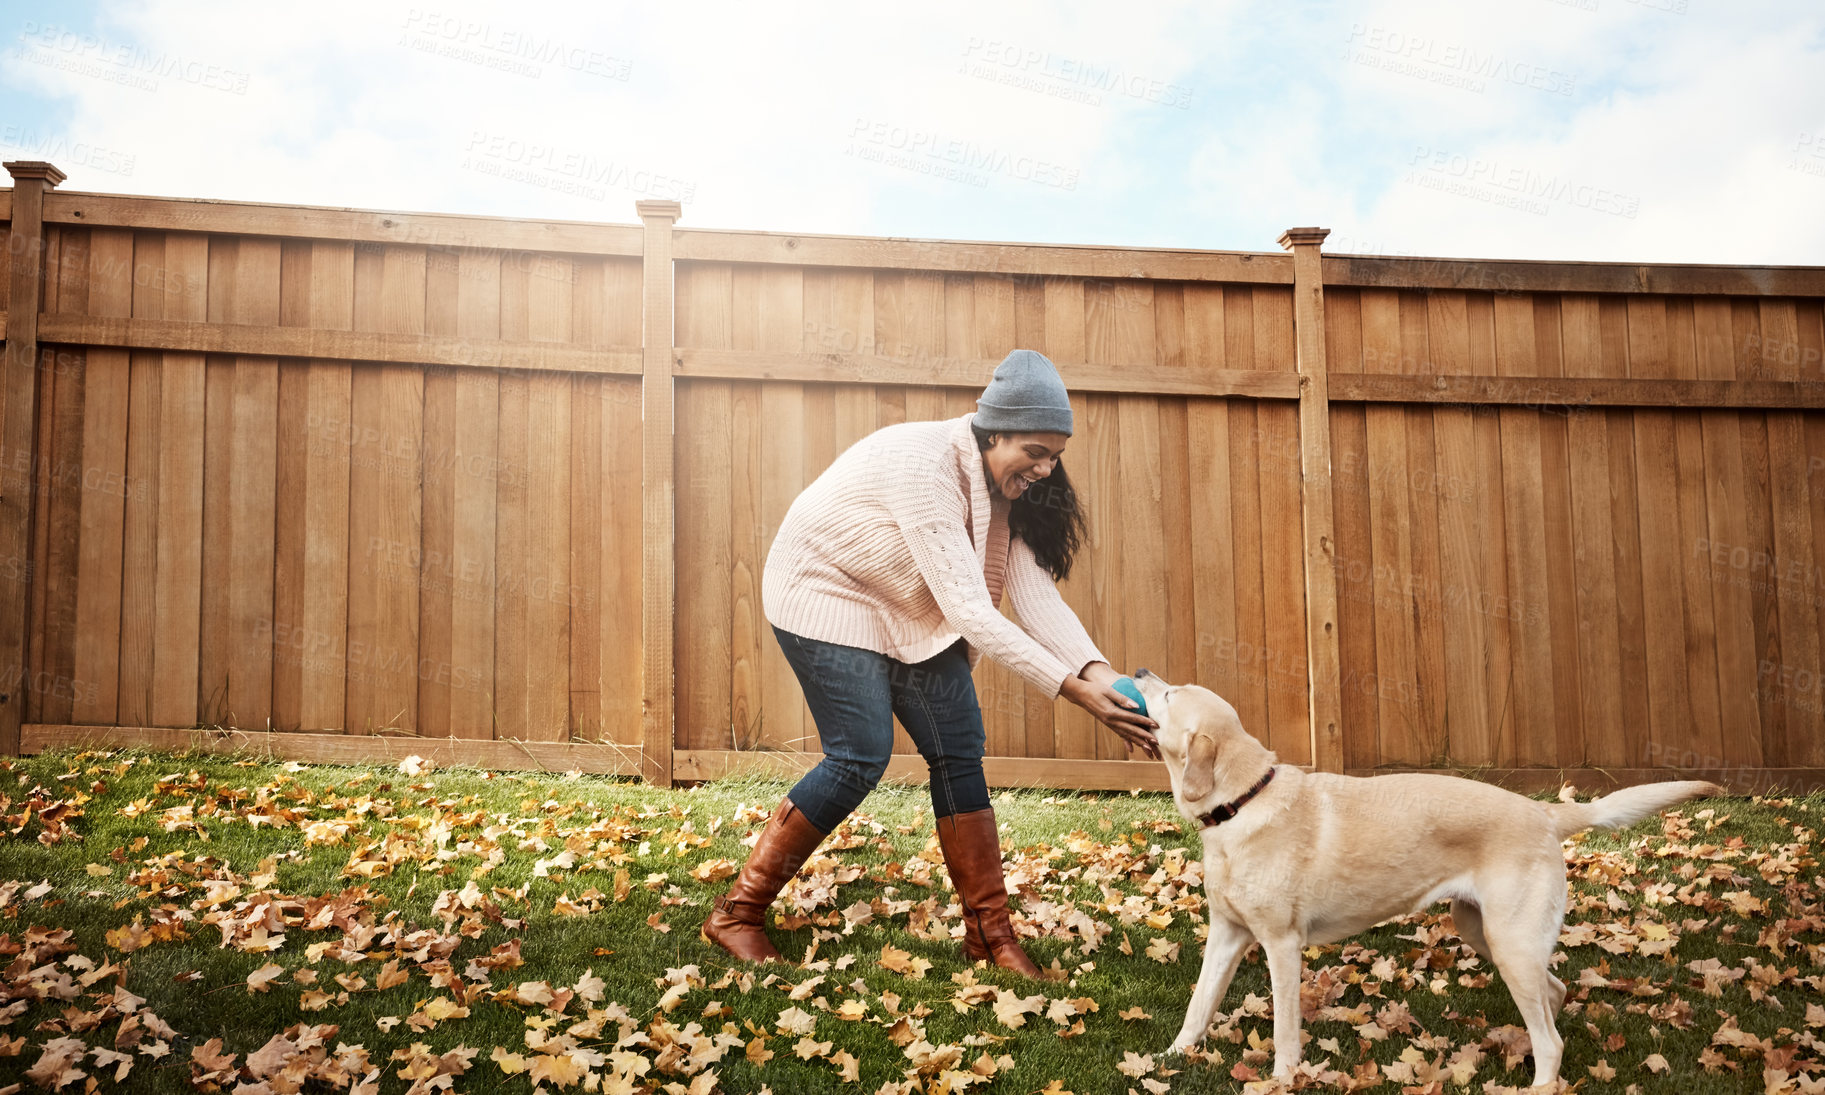 Buy stock photo Shot of a young woman playing with her dog outside